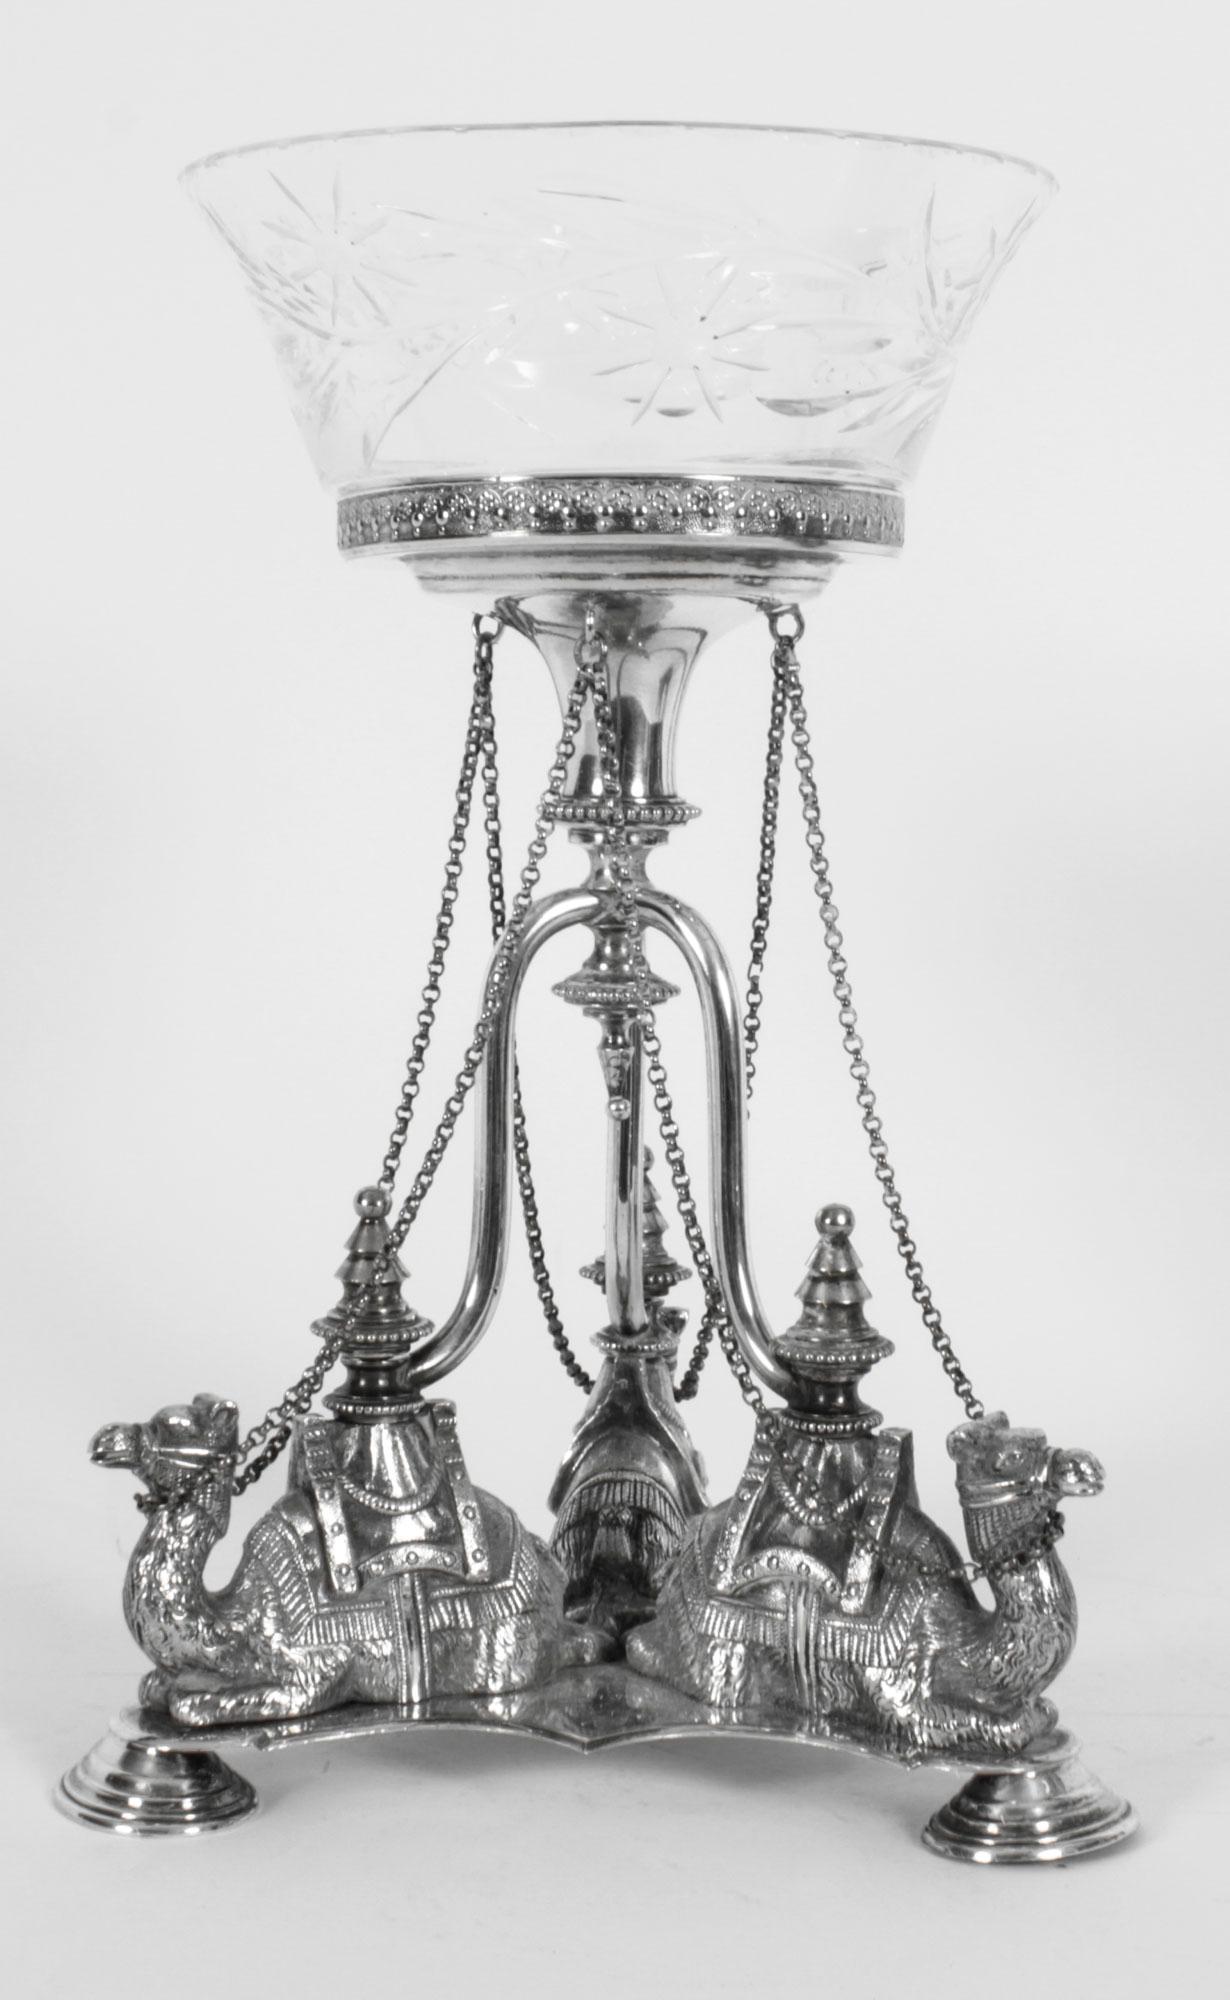 This is a stunning pair of antique English silver plate compotes each bearing the Victorian Registration Mark, circa 1870 in date.
 
The pair features three beautifully chased camels kneeling on the tripartite base on a central stems with